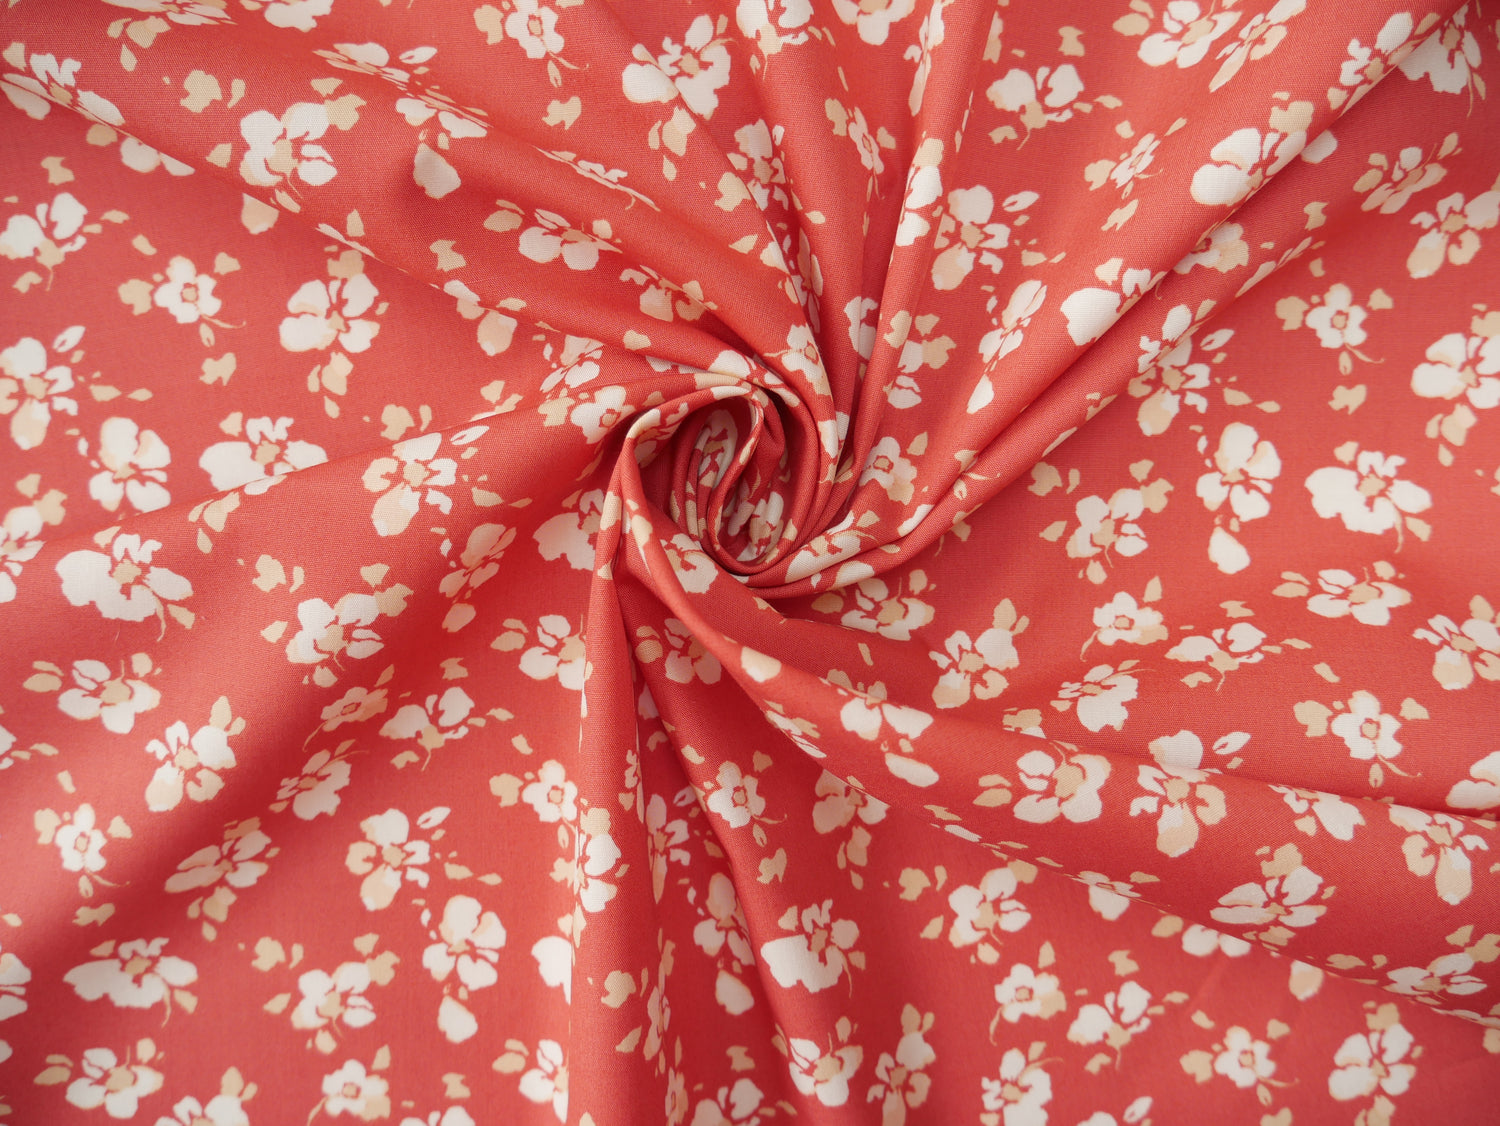 Rising Blooms by AGF in Cotton, £10.00 p/m-Cotton-Flying Bobbins Haberdashery